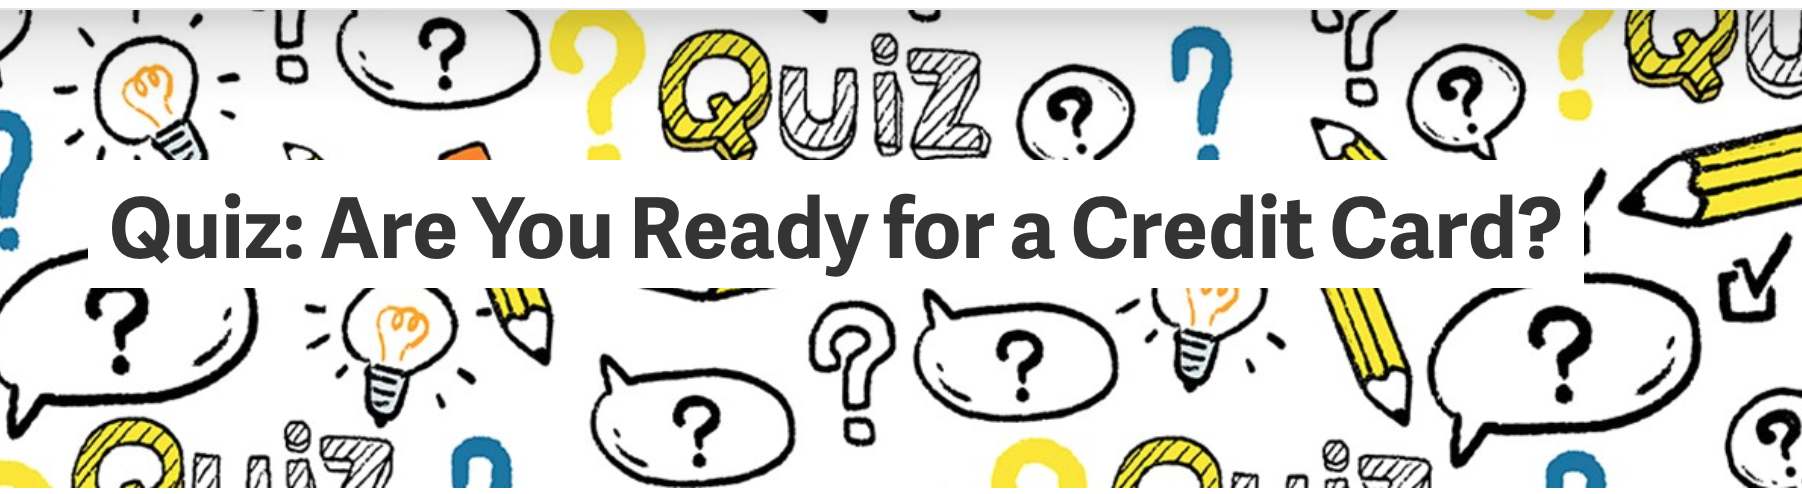 Quiz: Are you ready to have a credit card? Click here to learn more